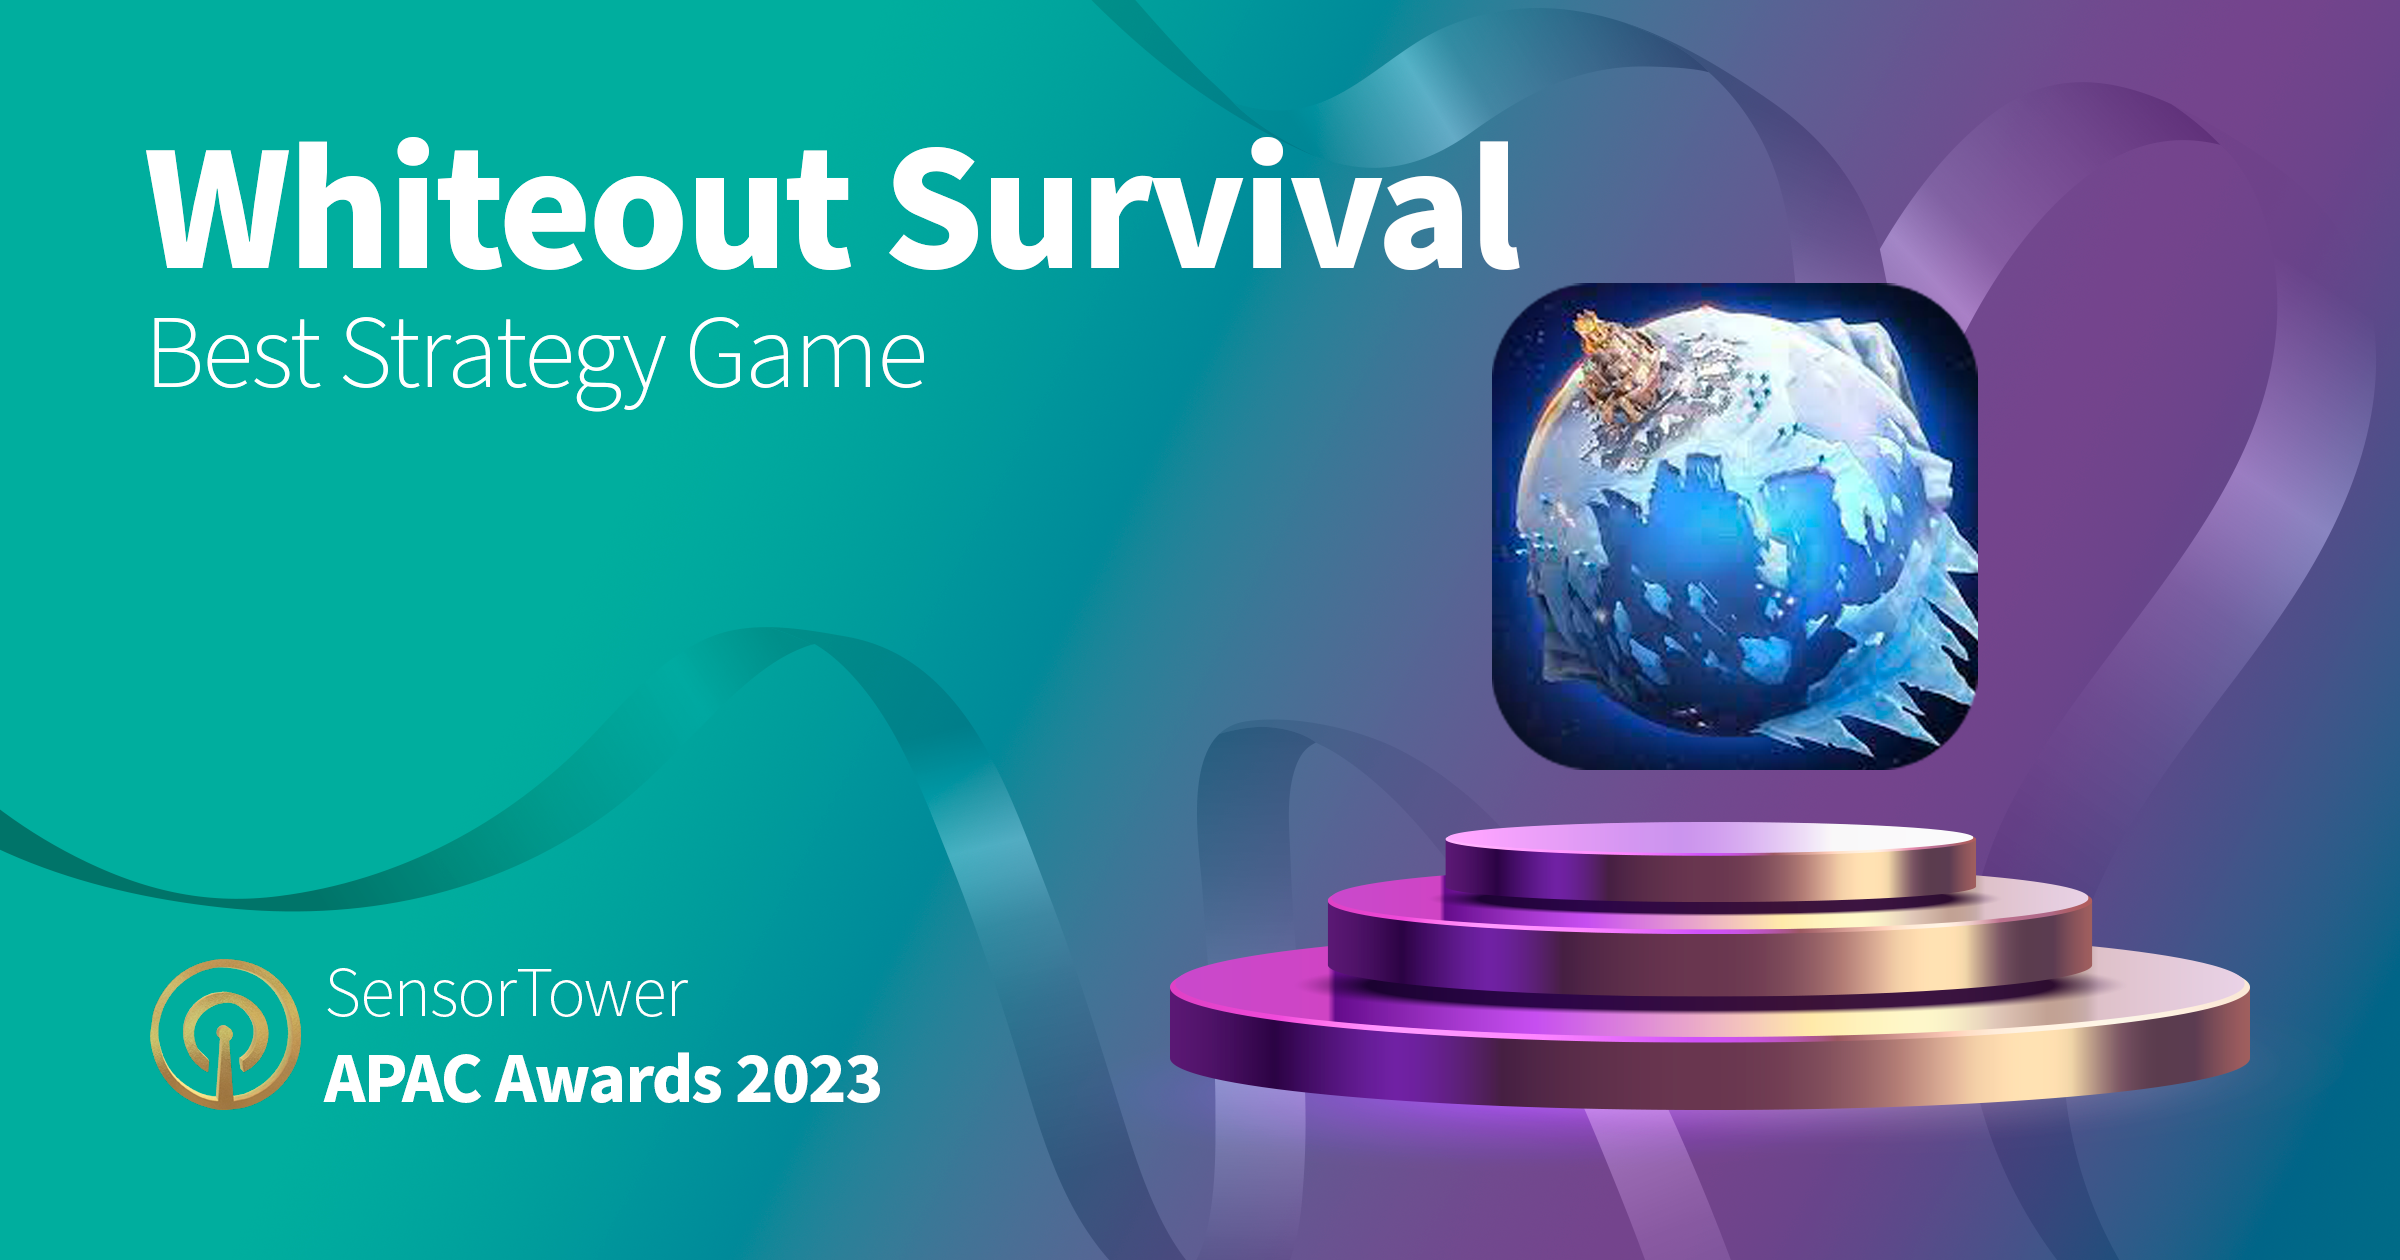 Whiteout Survival (Best Strategy Game)